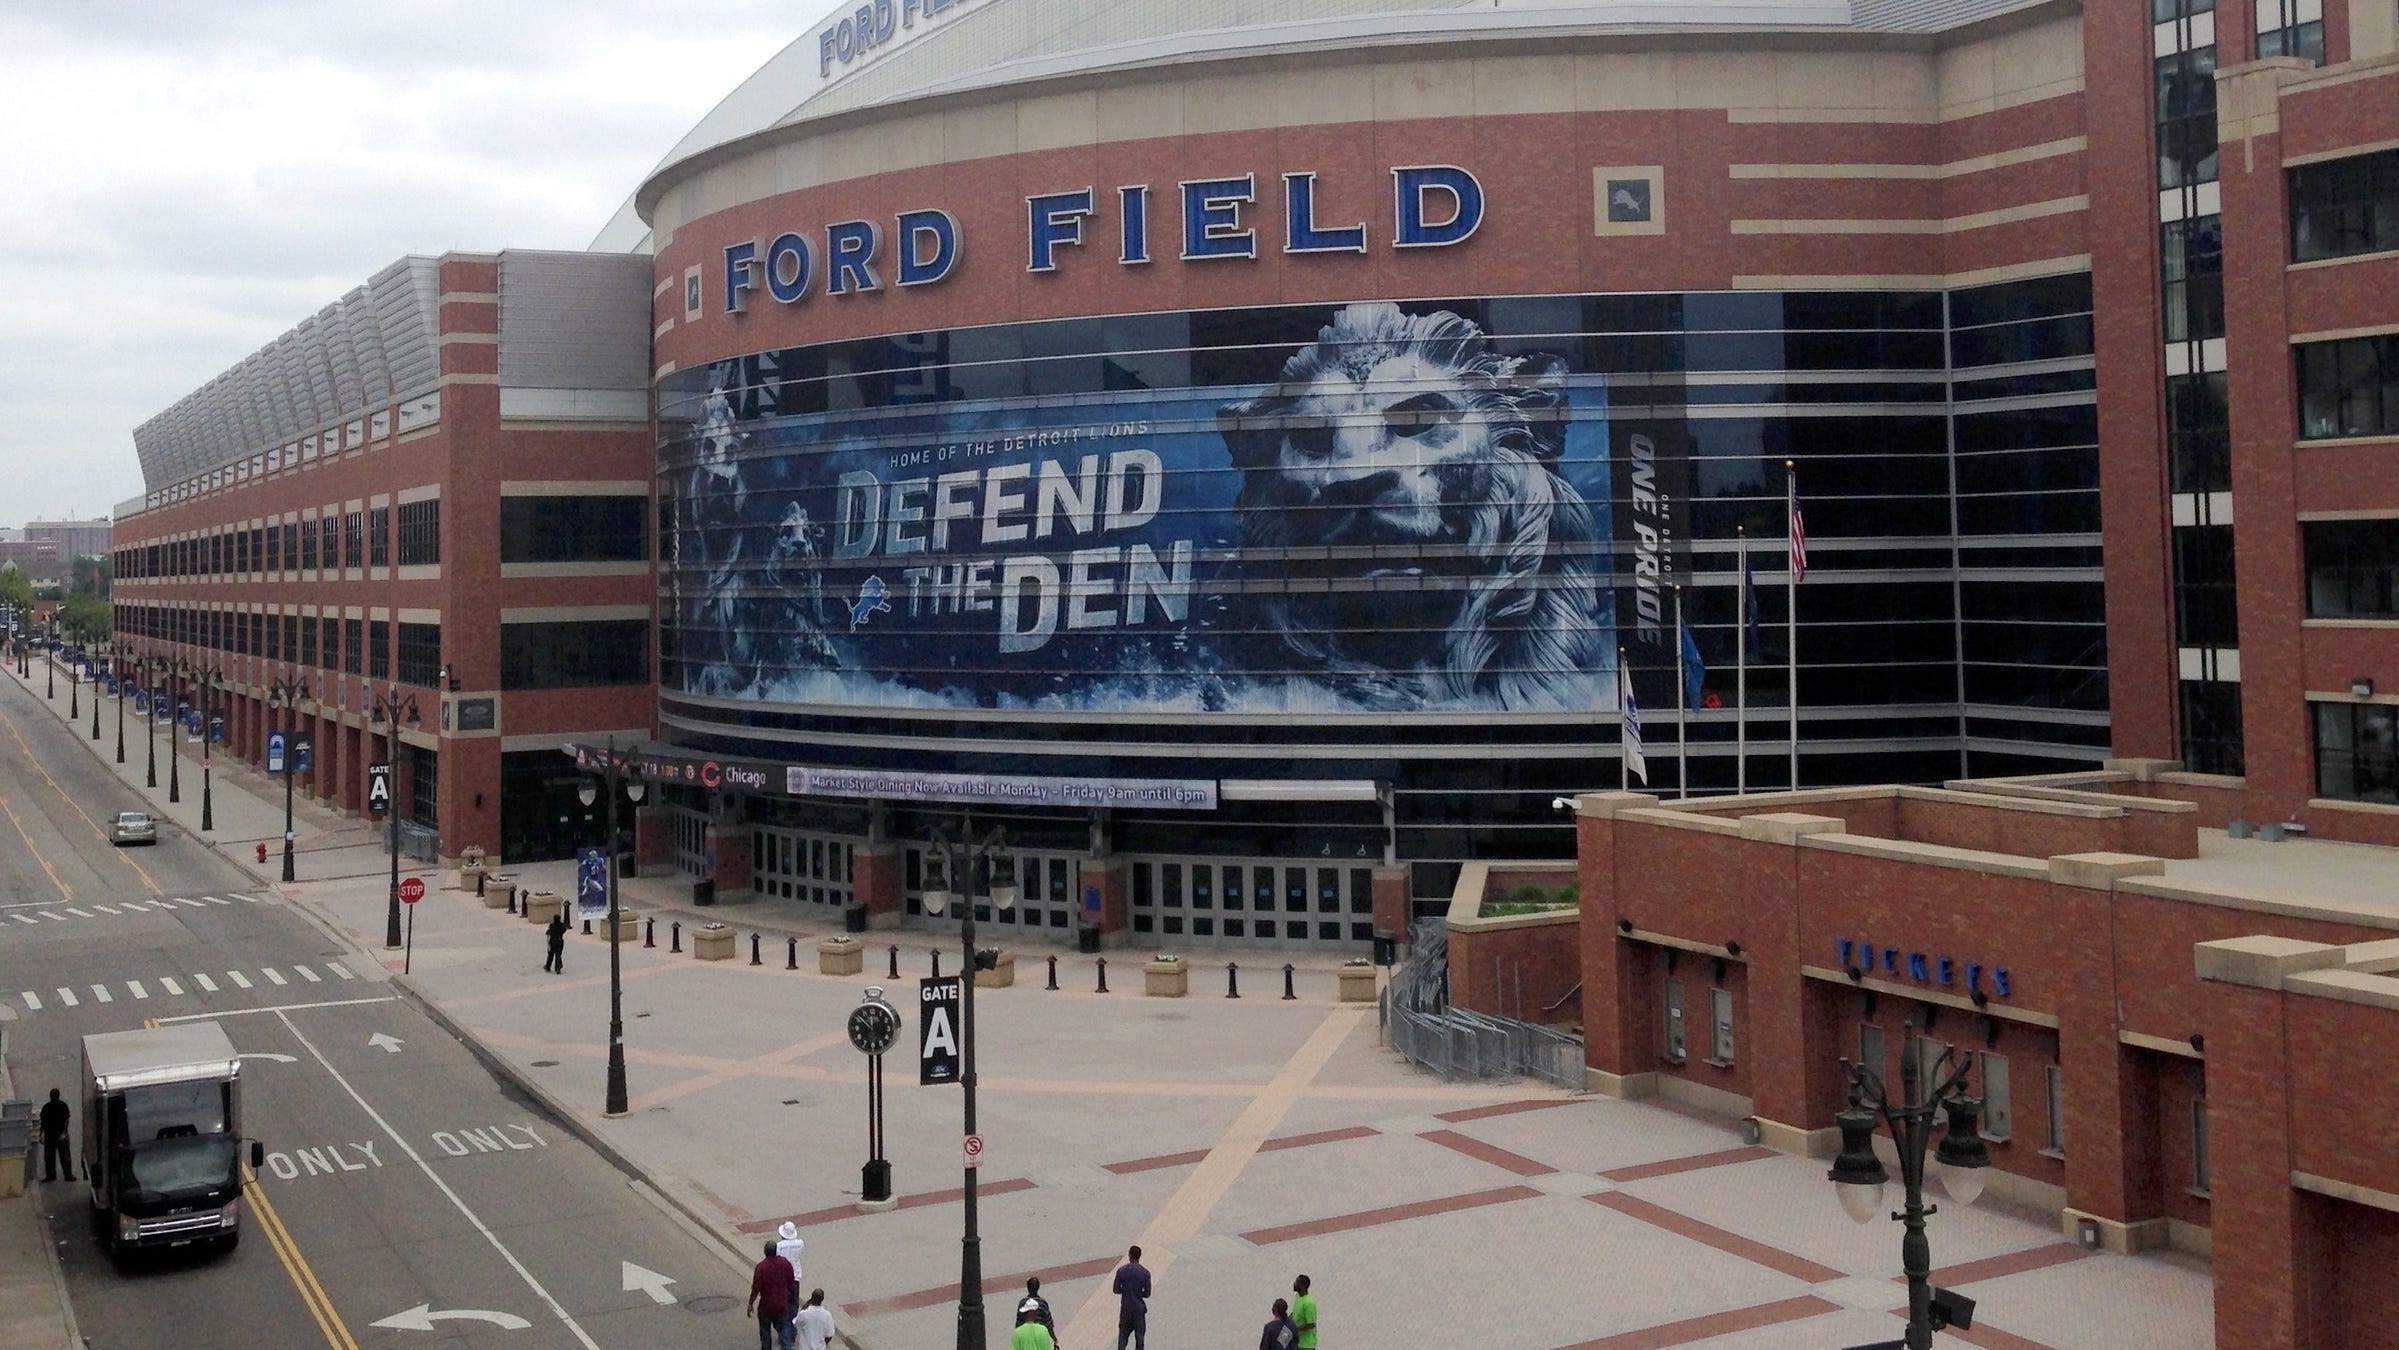 WWE's 'SummerSlam' event is coming to Detroit's Ford Field